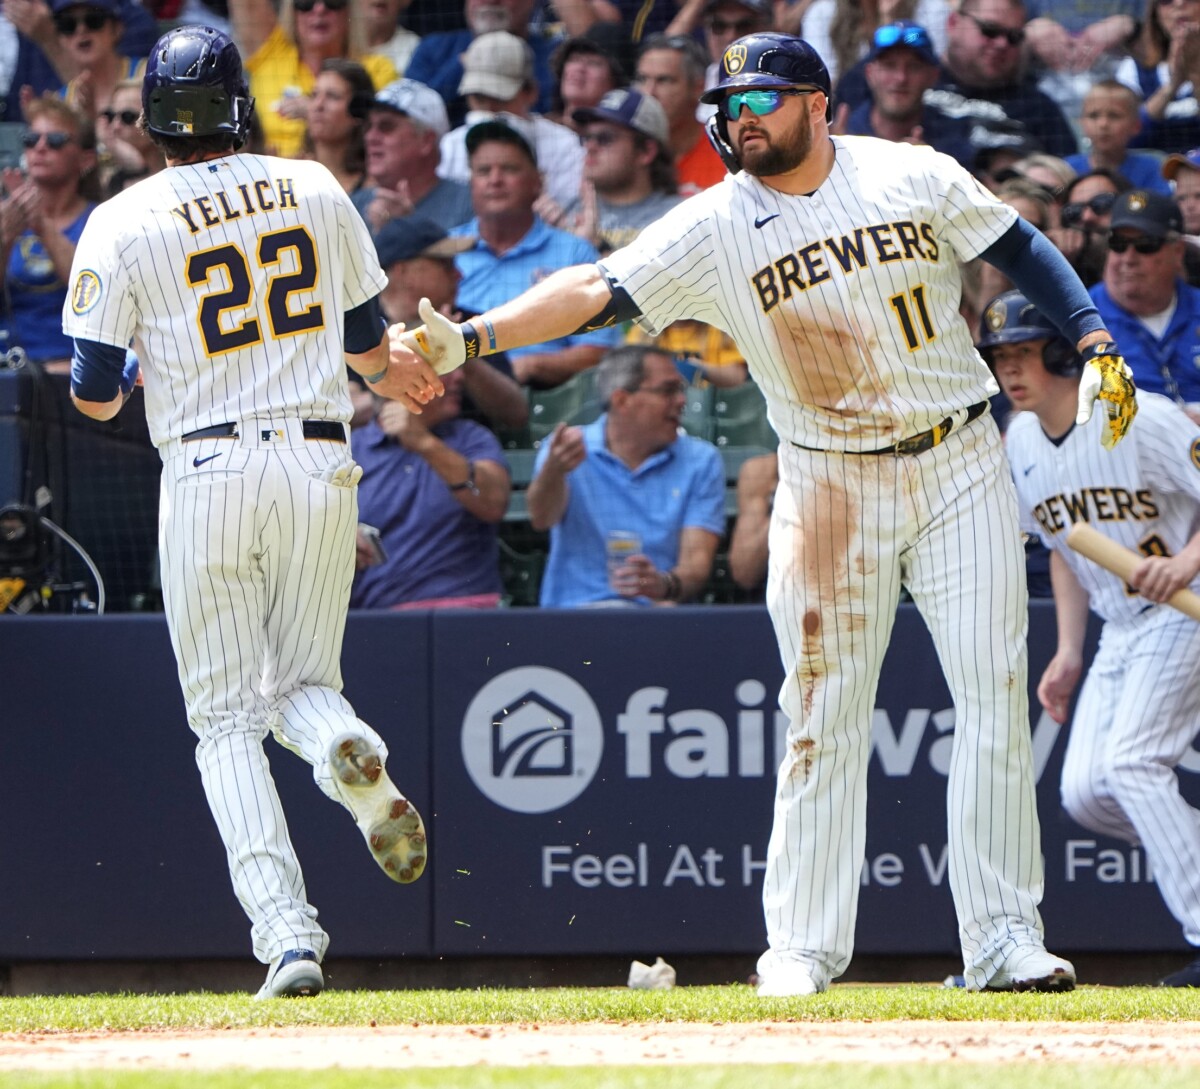 Milwaukee Brewers left fielder Christian Yelich (22) is congratulated by first baseman Rowdy Tellez (11) after coring on a single by catcher William Contreras during the first inning of their game against the San Francisco Giants Sunday, May 28, 2023 at American Family Field in Milwaukee, Wis. (MLB News)